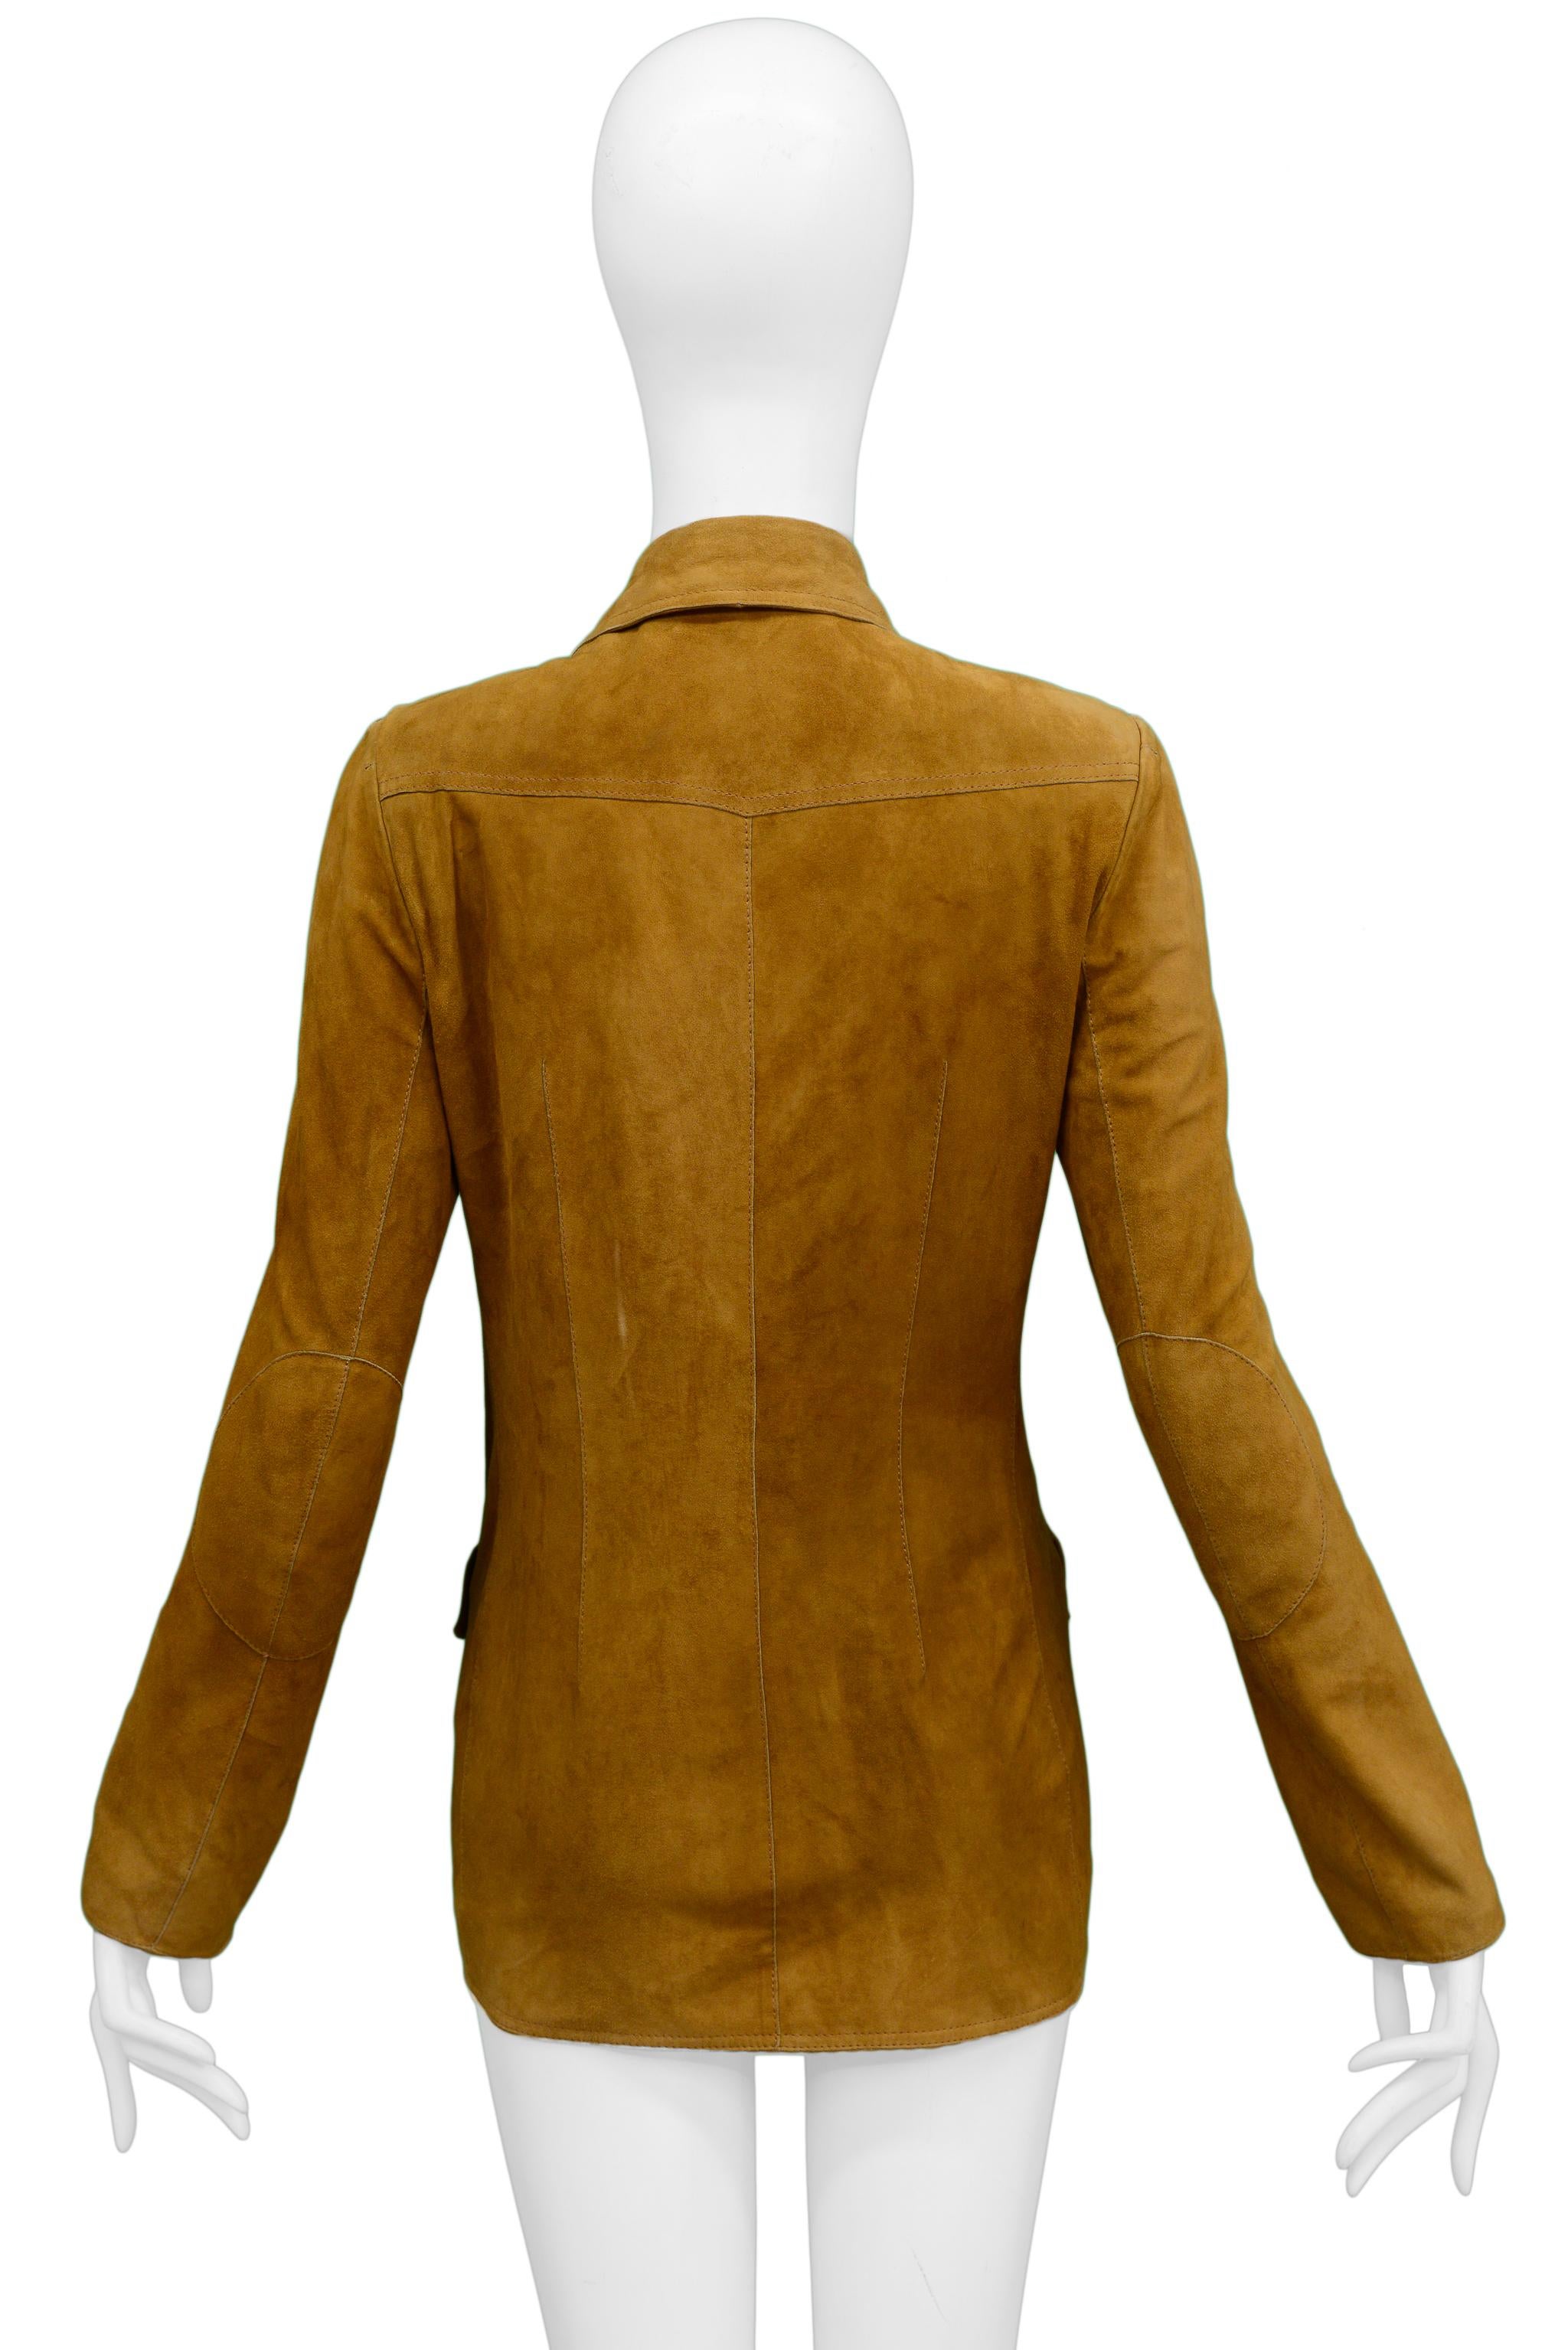 Christian Dior by John Galliano Brown Suede Blazer Jacket with Buttons For Sale 1